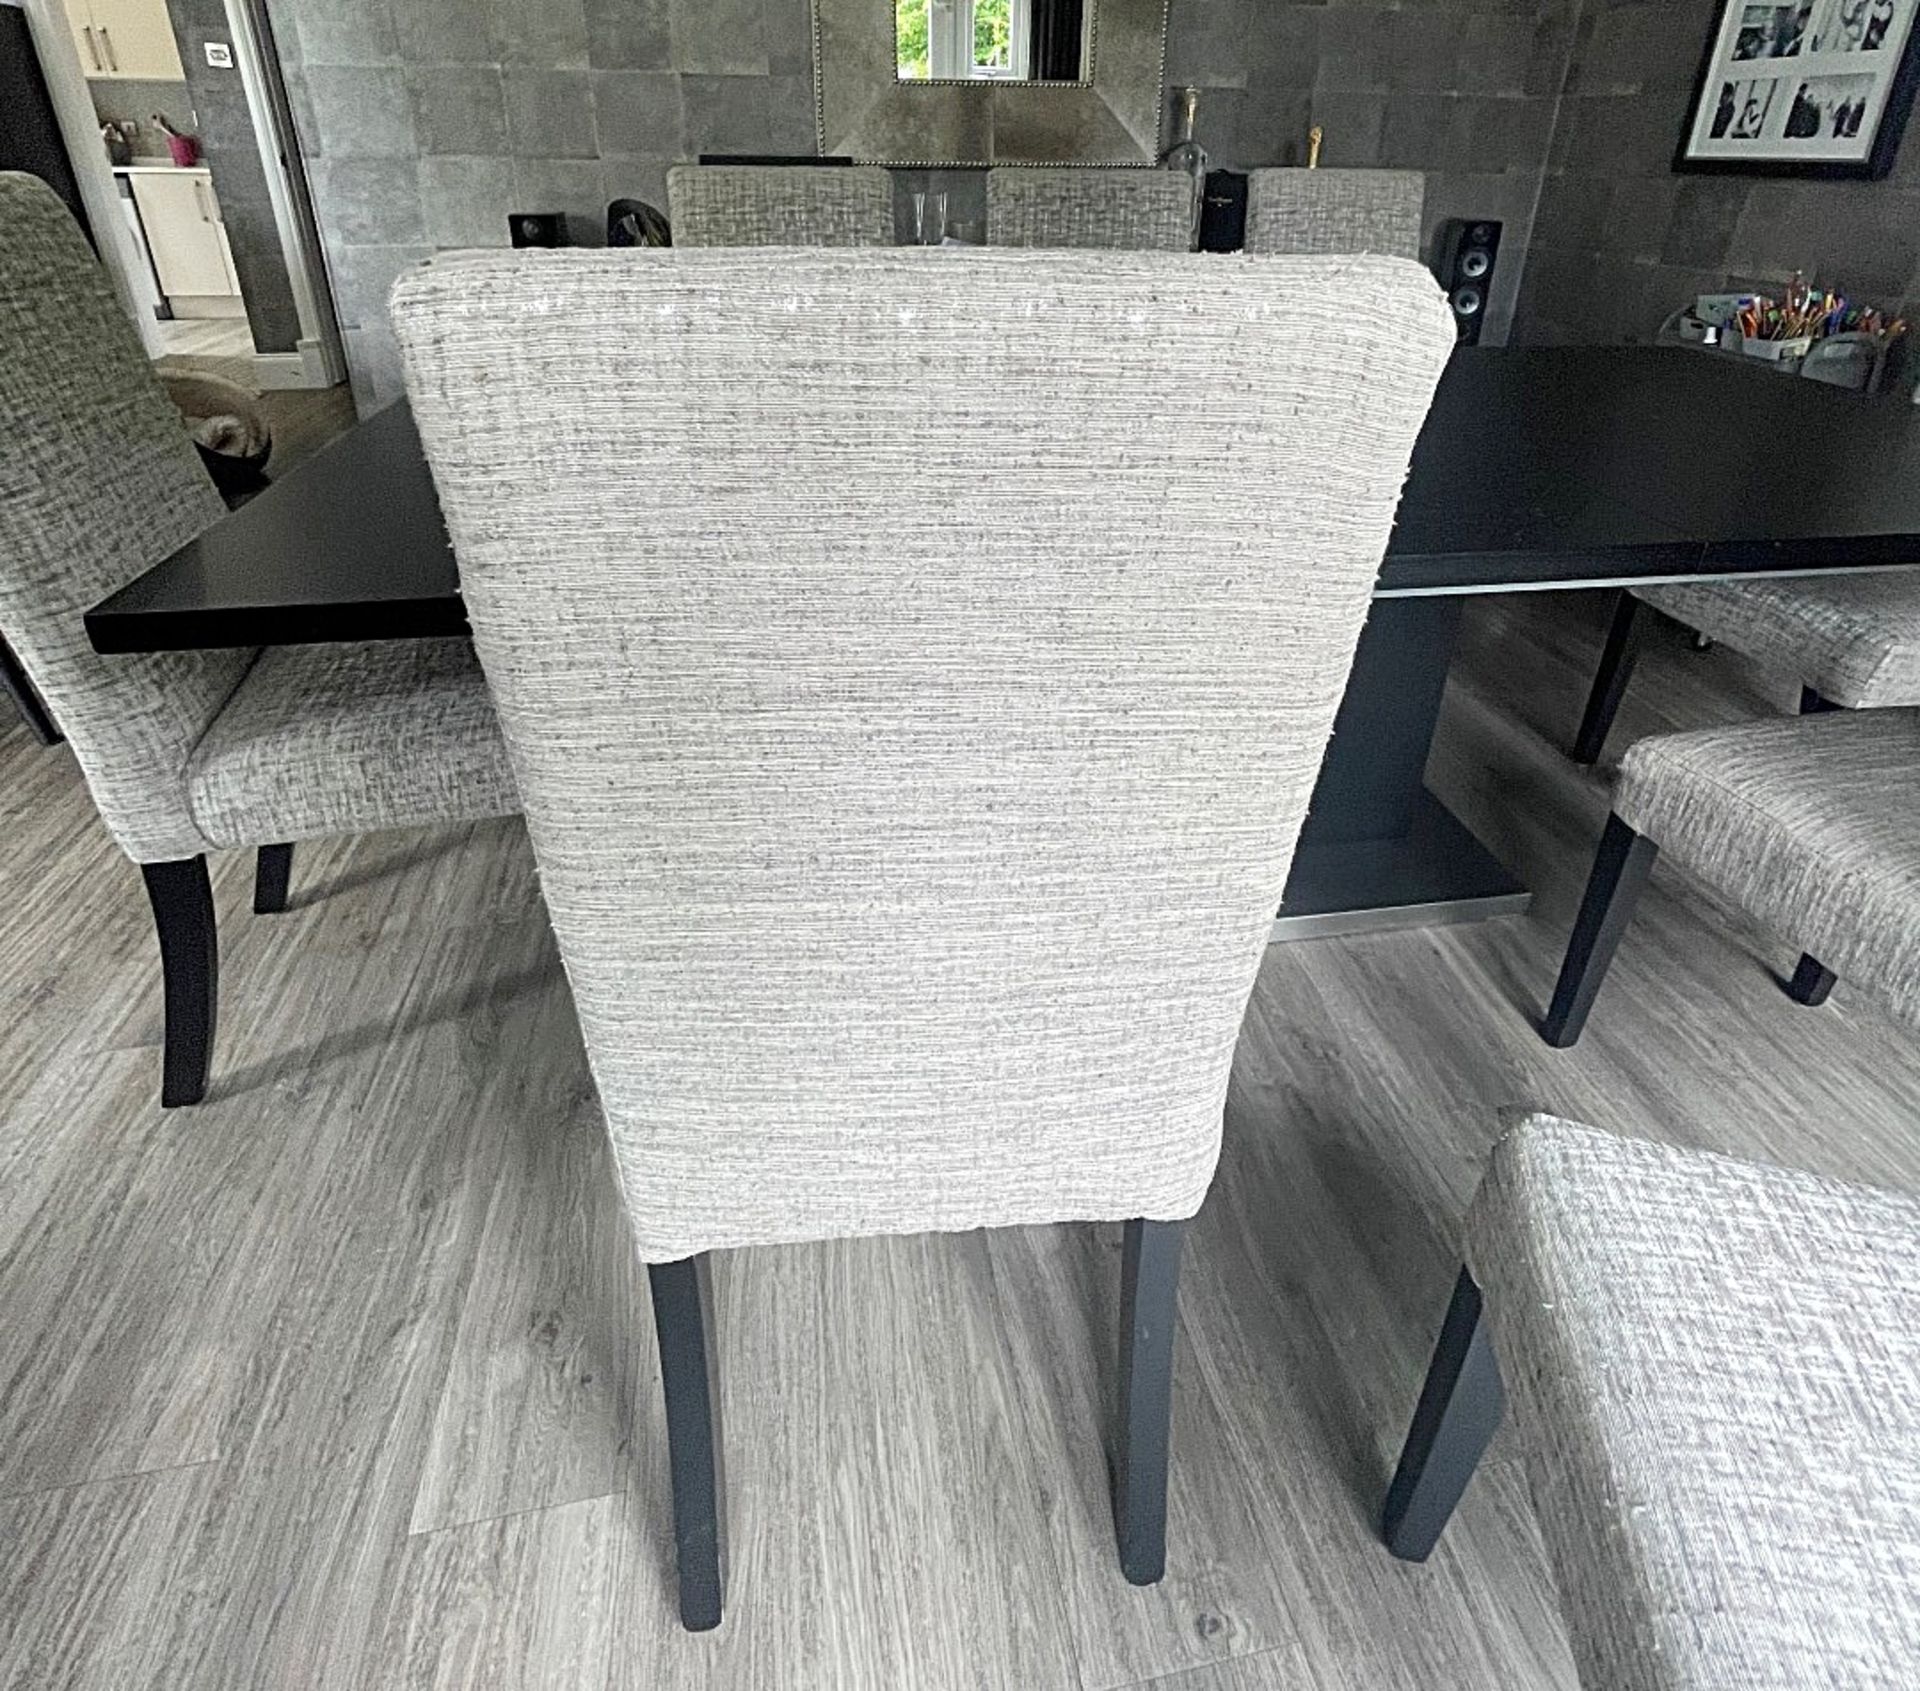 1 x Extending 2.4-Metre Dining Table With 8 x Upholstered Chairs, And Sideboard Unit - NO VAT - Image 25 of 26